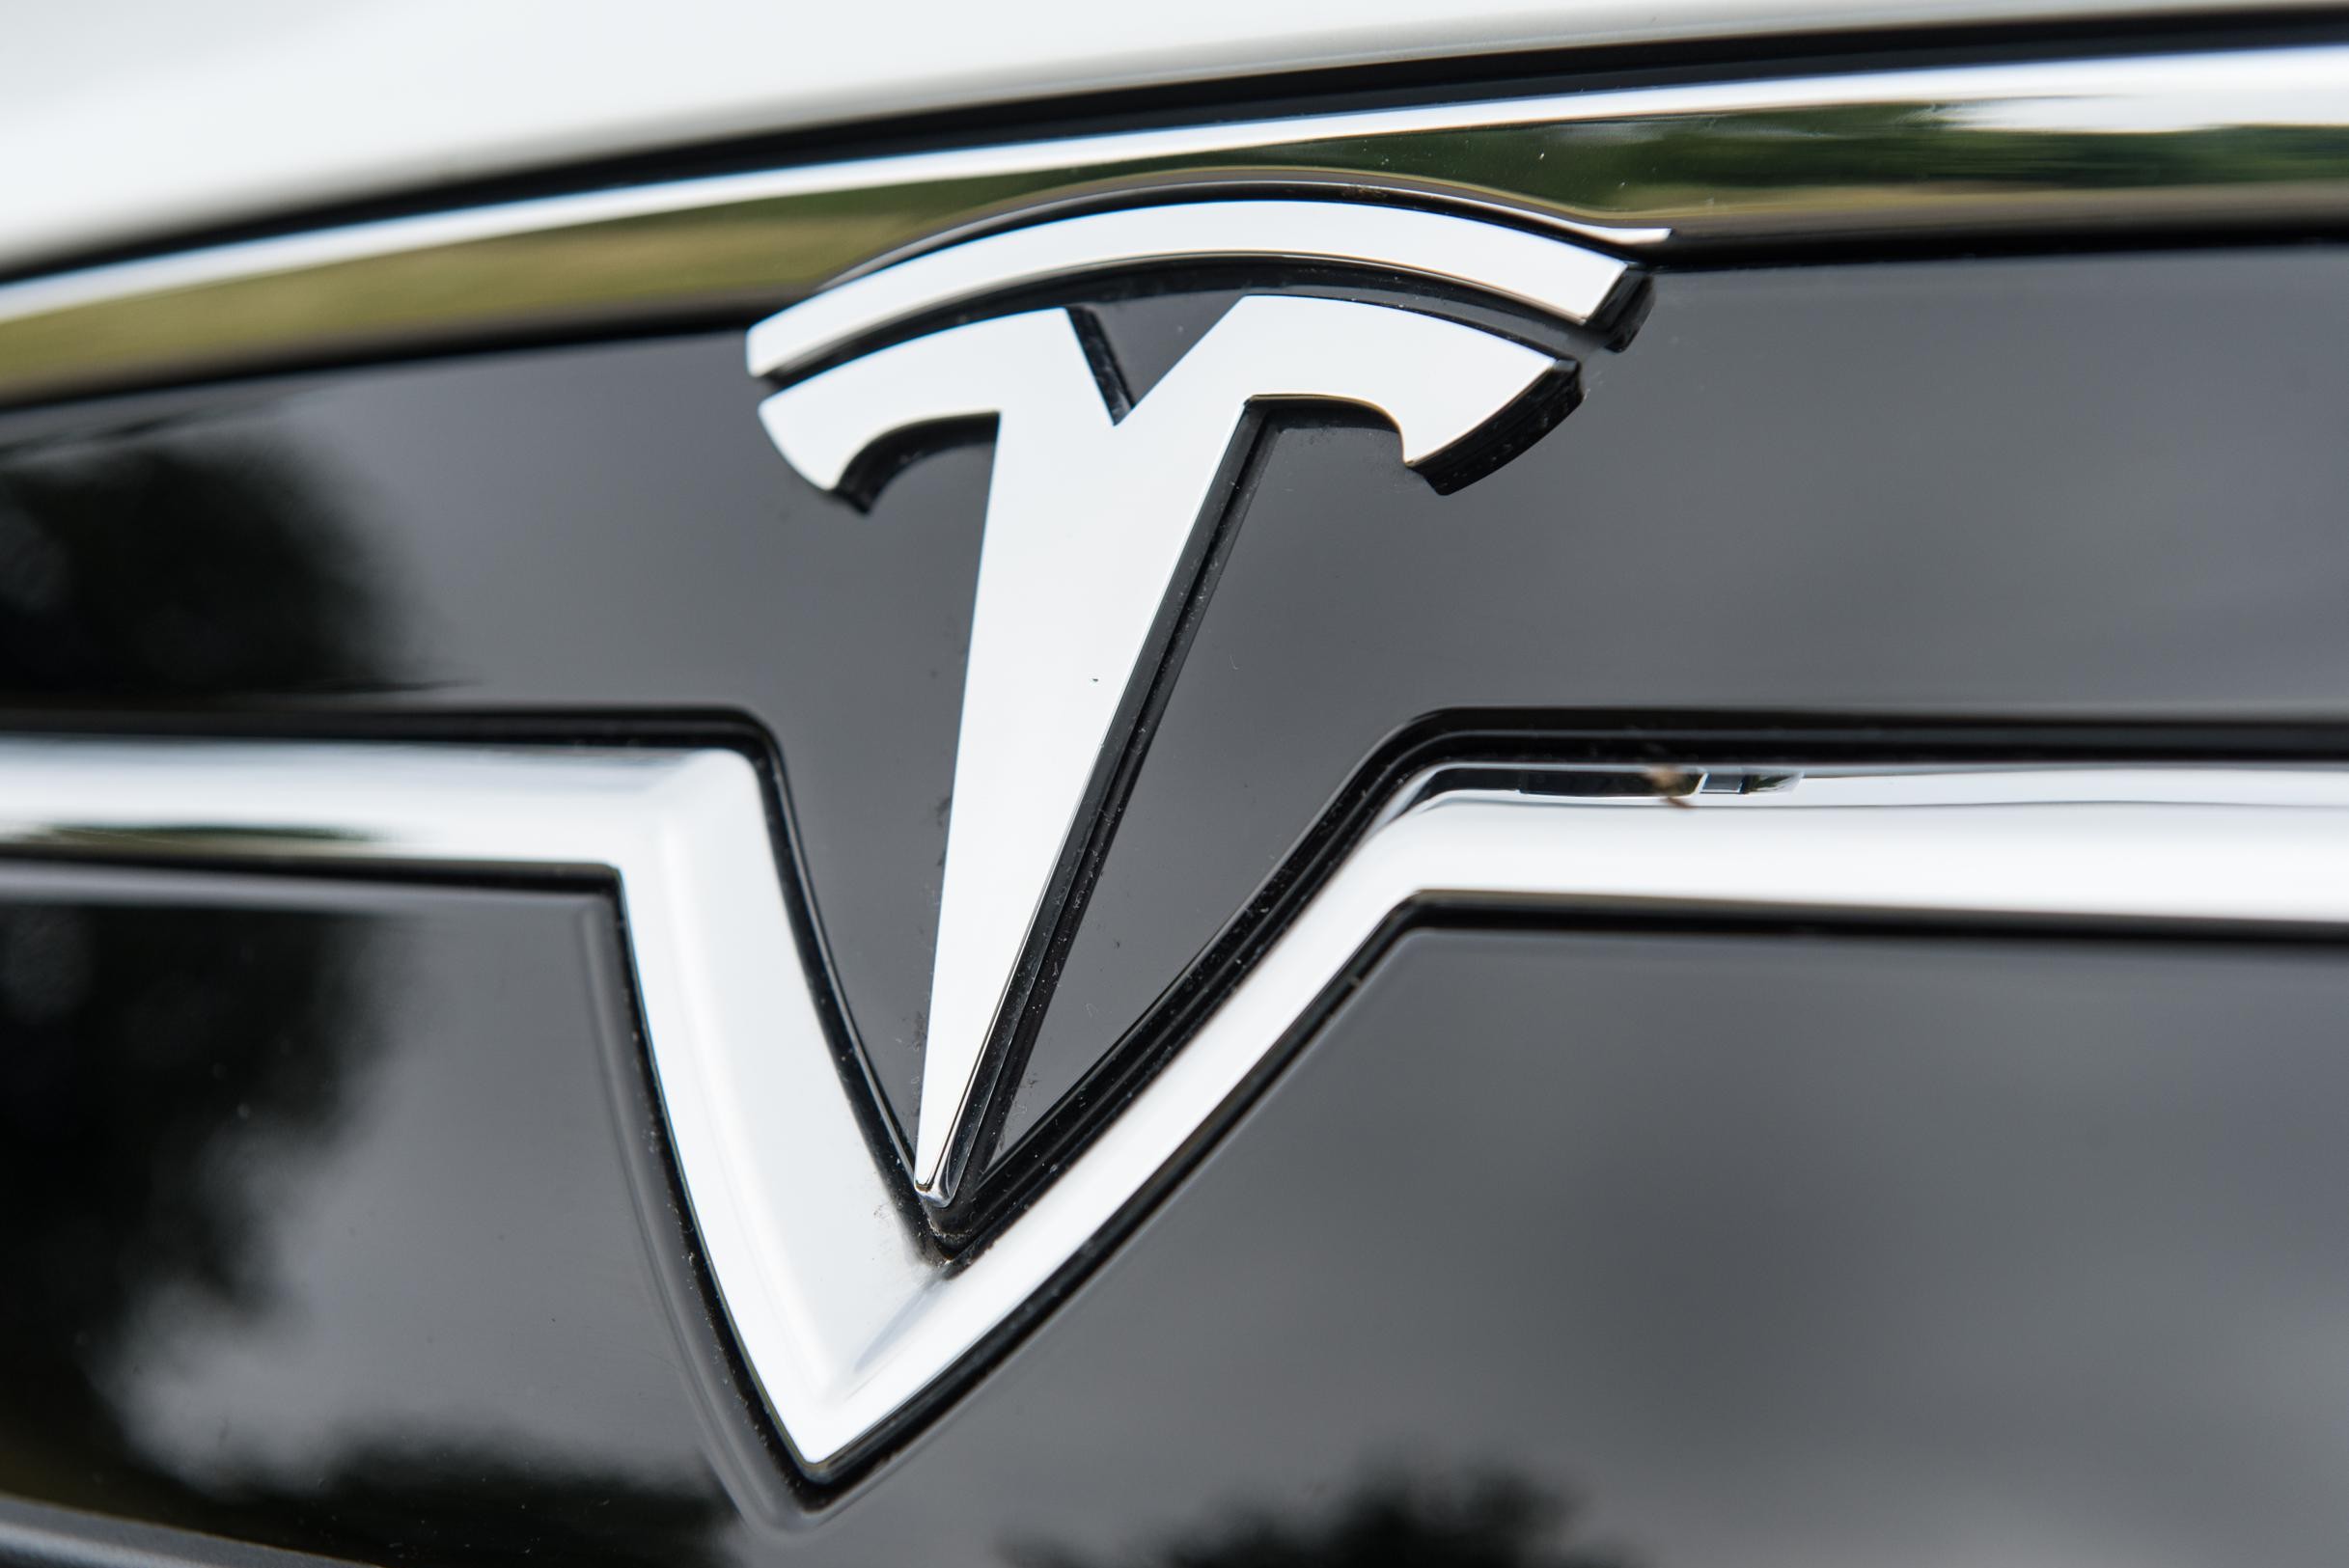 Tesla has to recall 130,000 cars after touchscreen problems